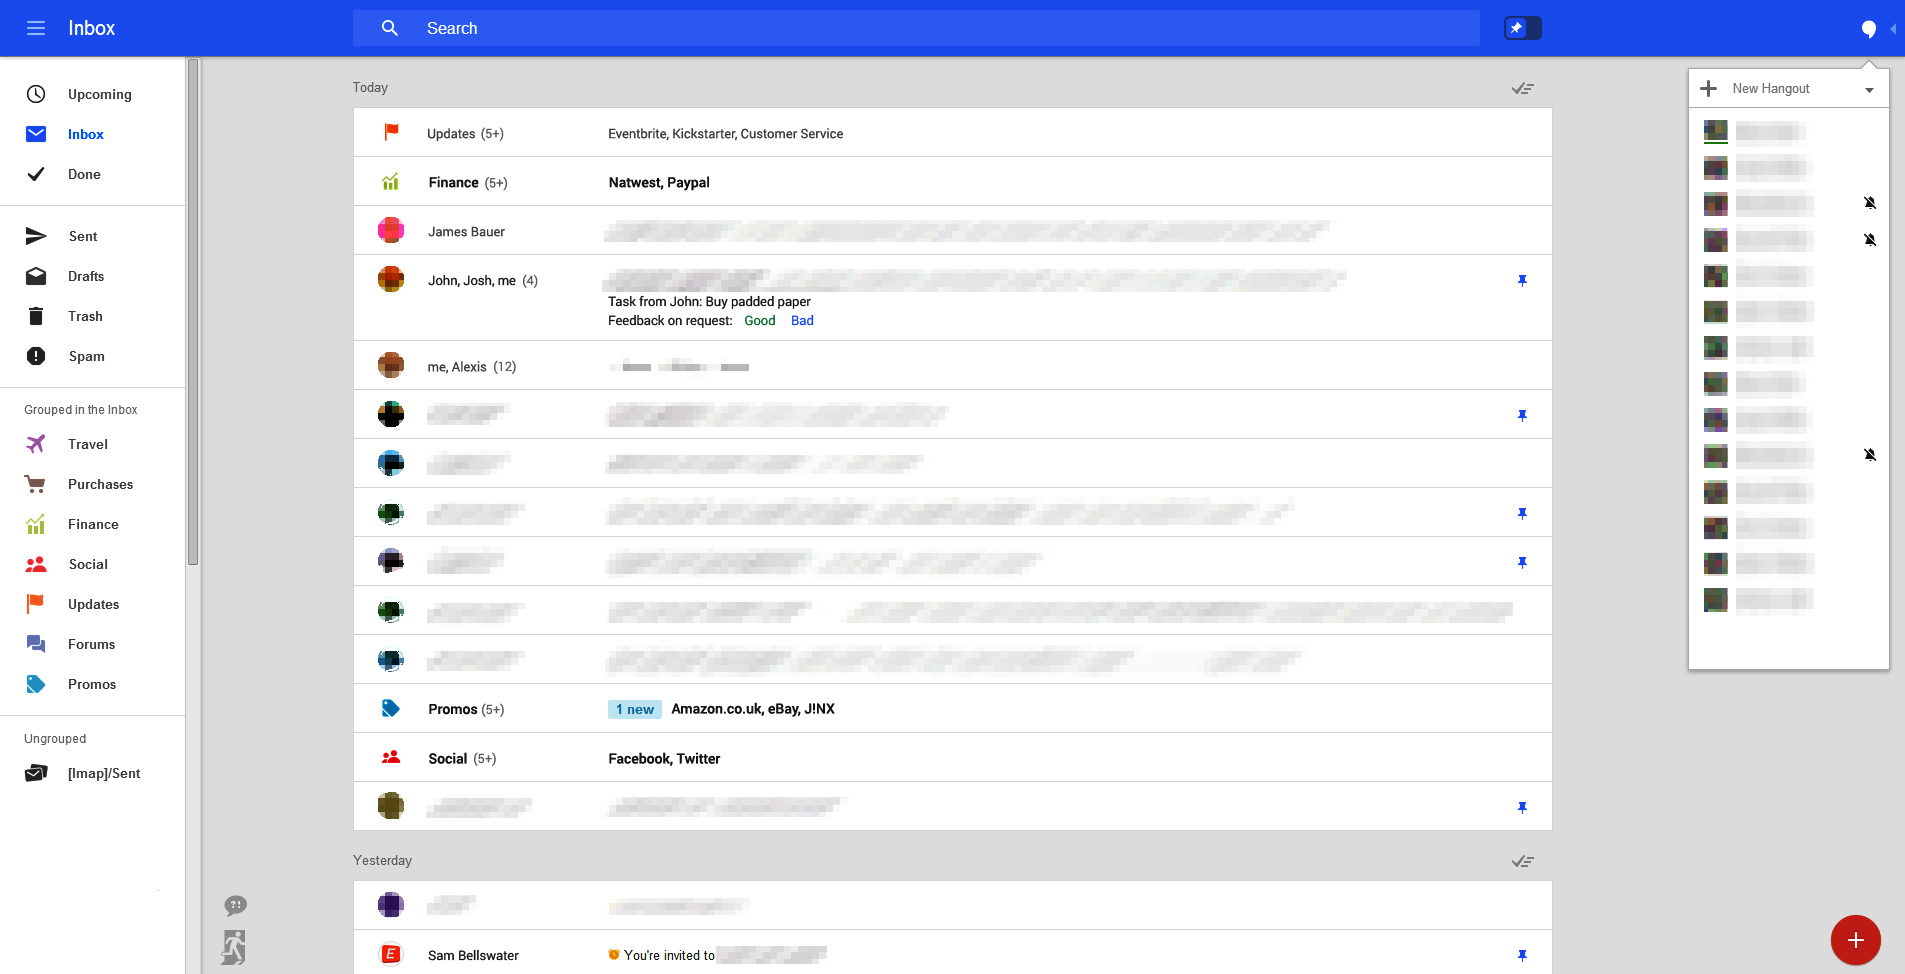 Gmail redesign